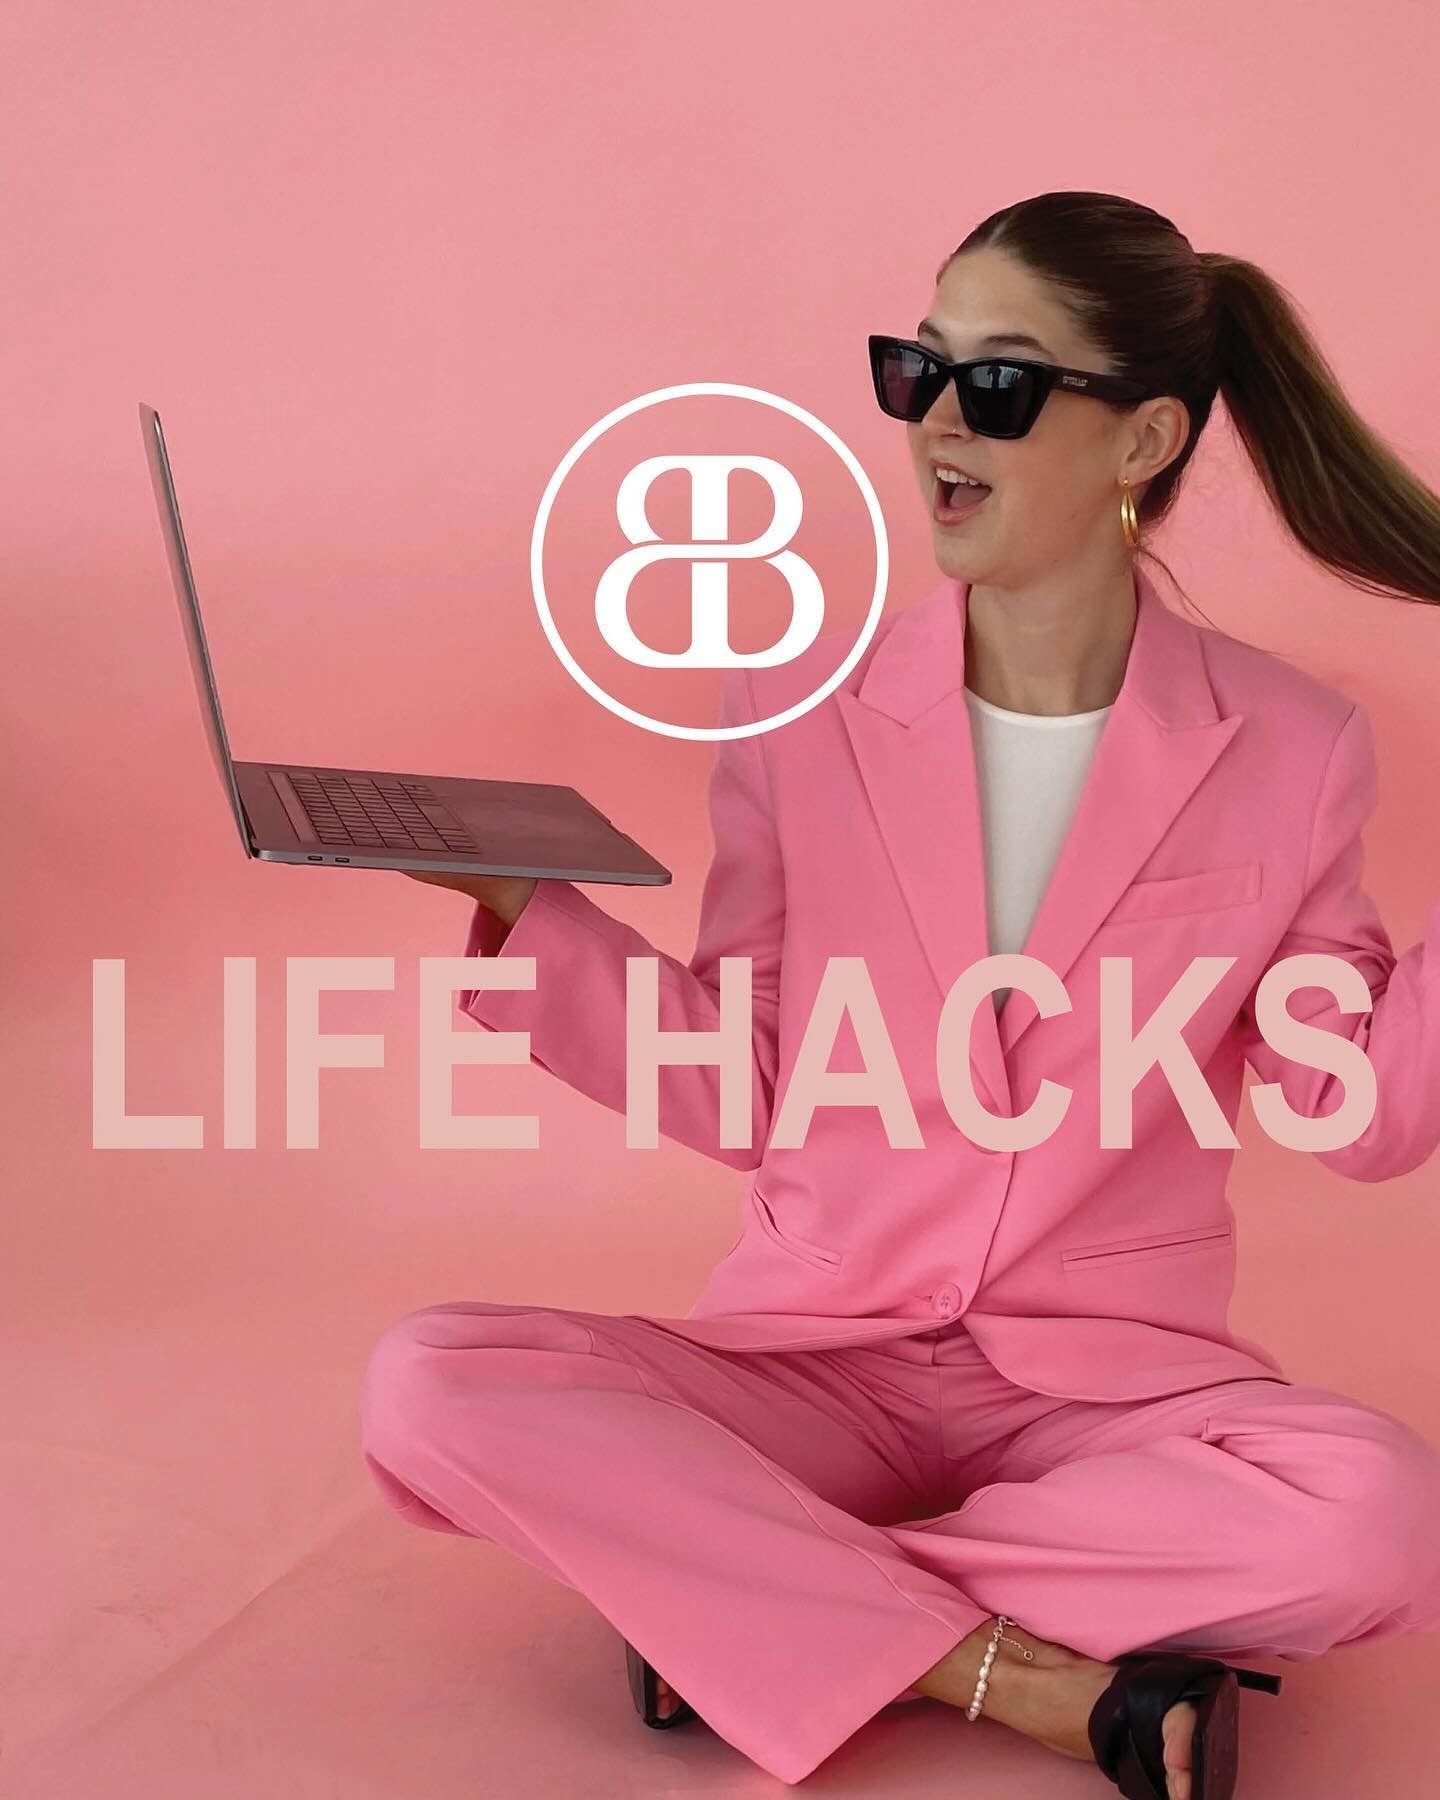 LIFE HACKS 
The problem:
Your calendar is a mess! 
When your work calendar is constantly clashing with your personal calendar and now you have to reschedule that catch up with your accountant because it clashes with soccer training.

The solution:
Cl